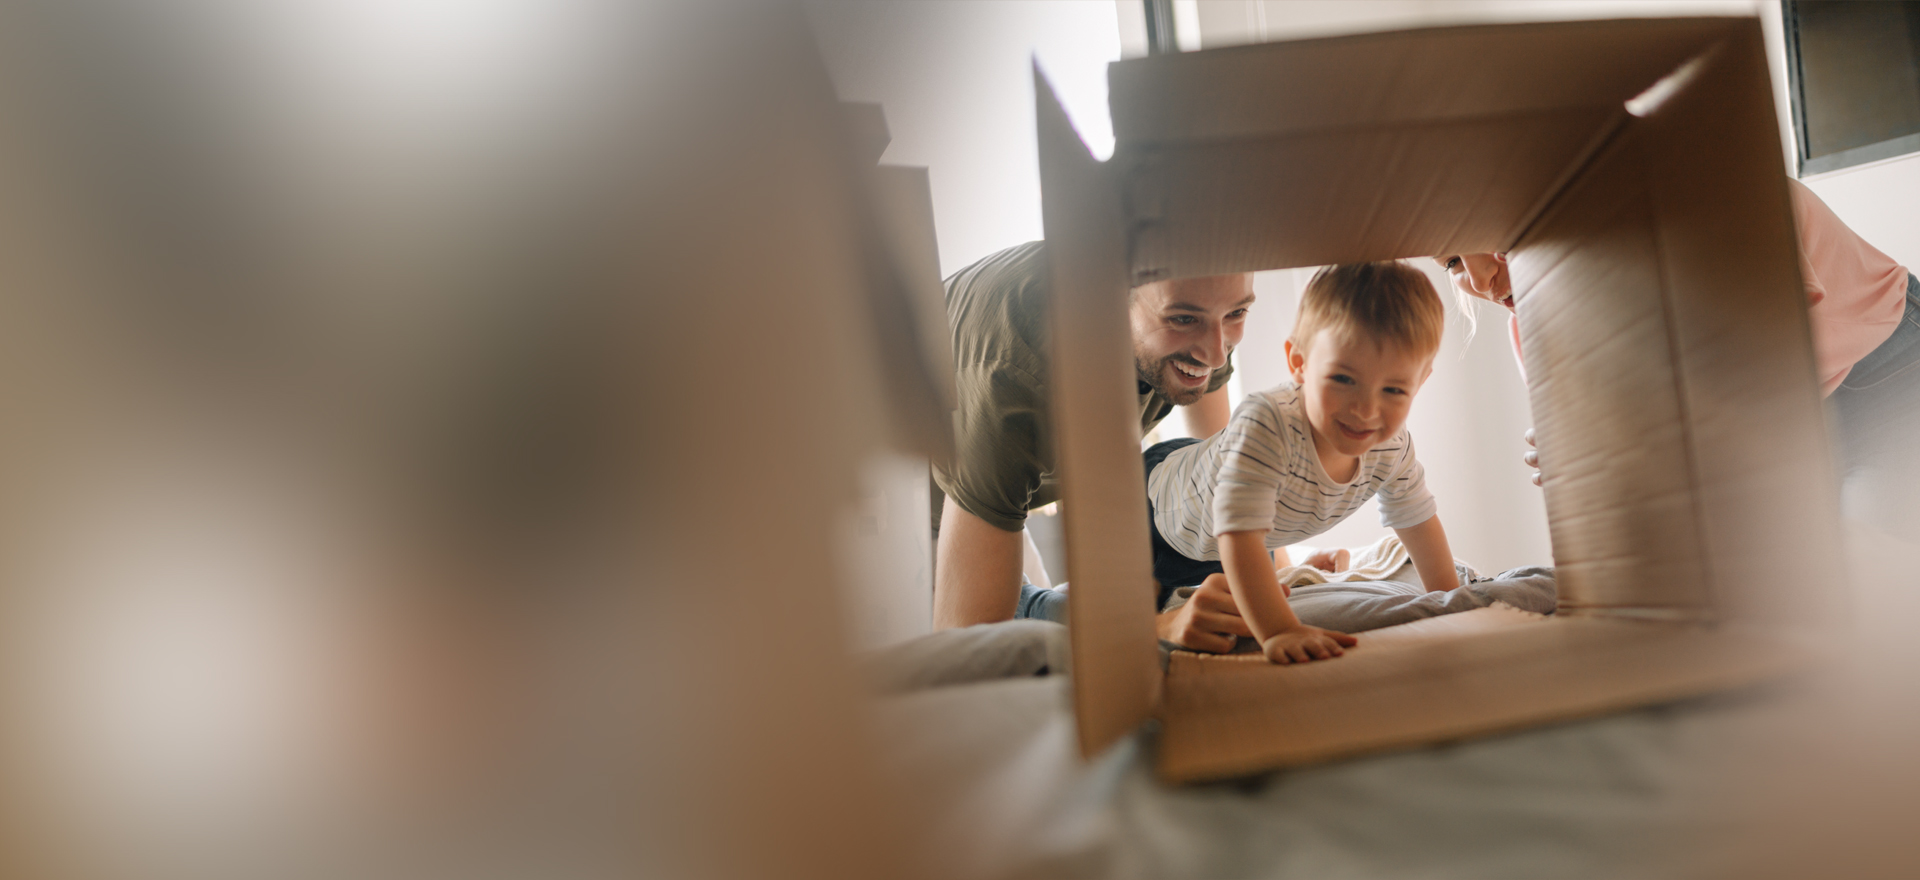 Moving house without the stress - Greater Bank